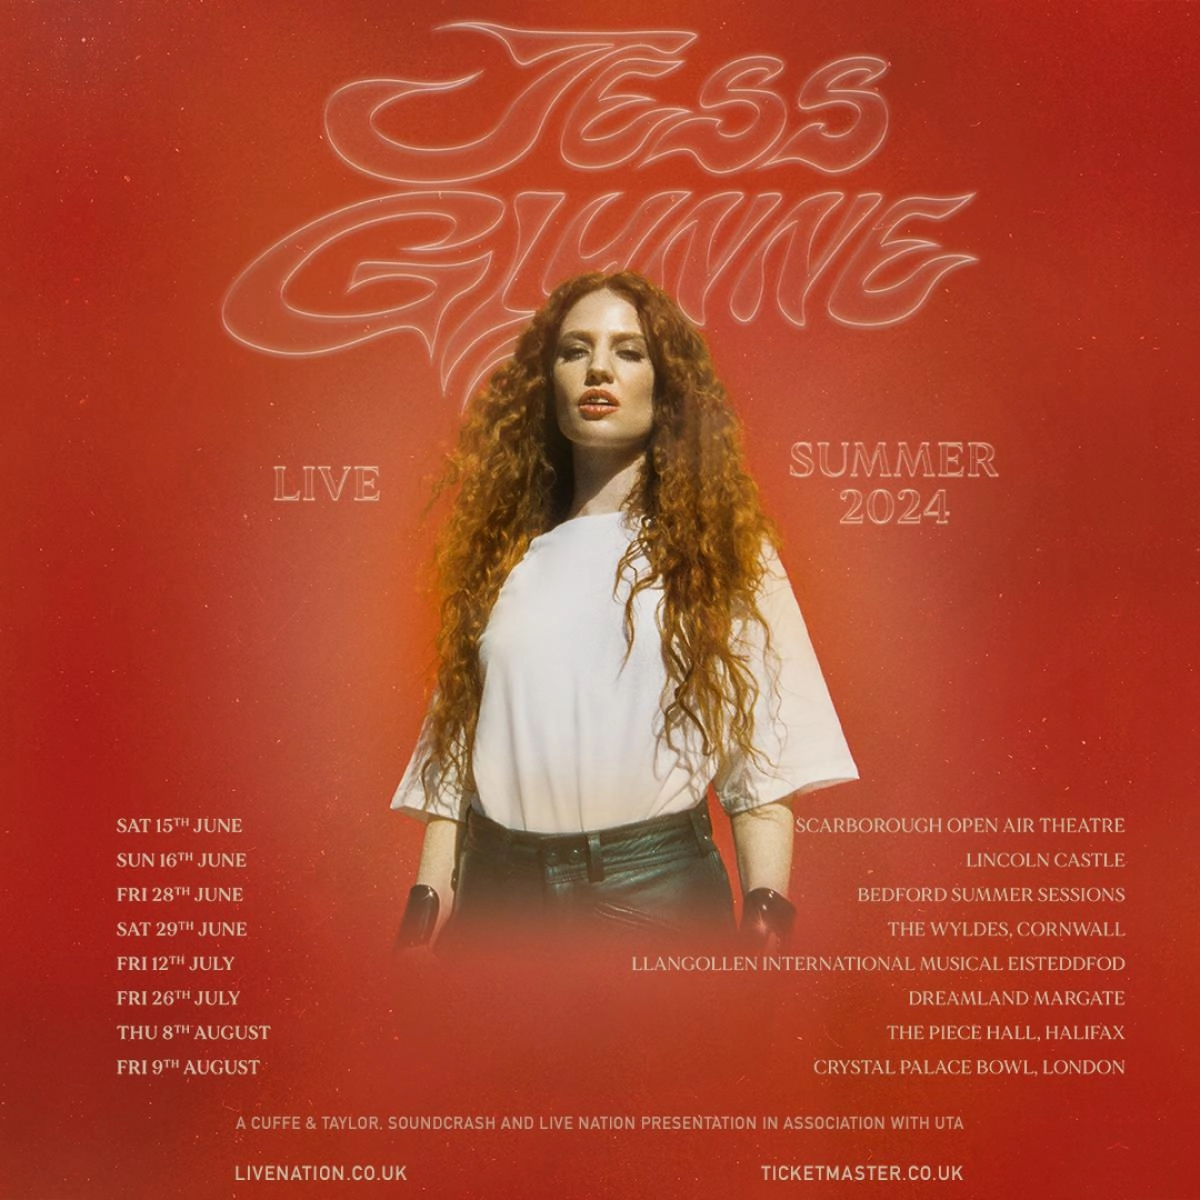 Jess Glynne at Lincoln Castle Tickets